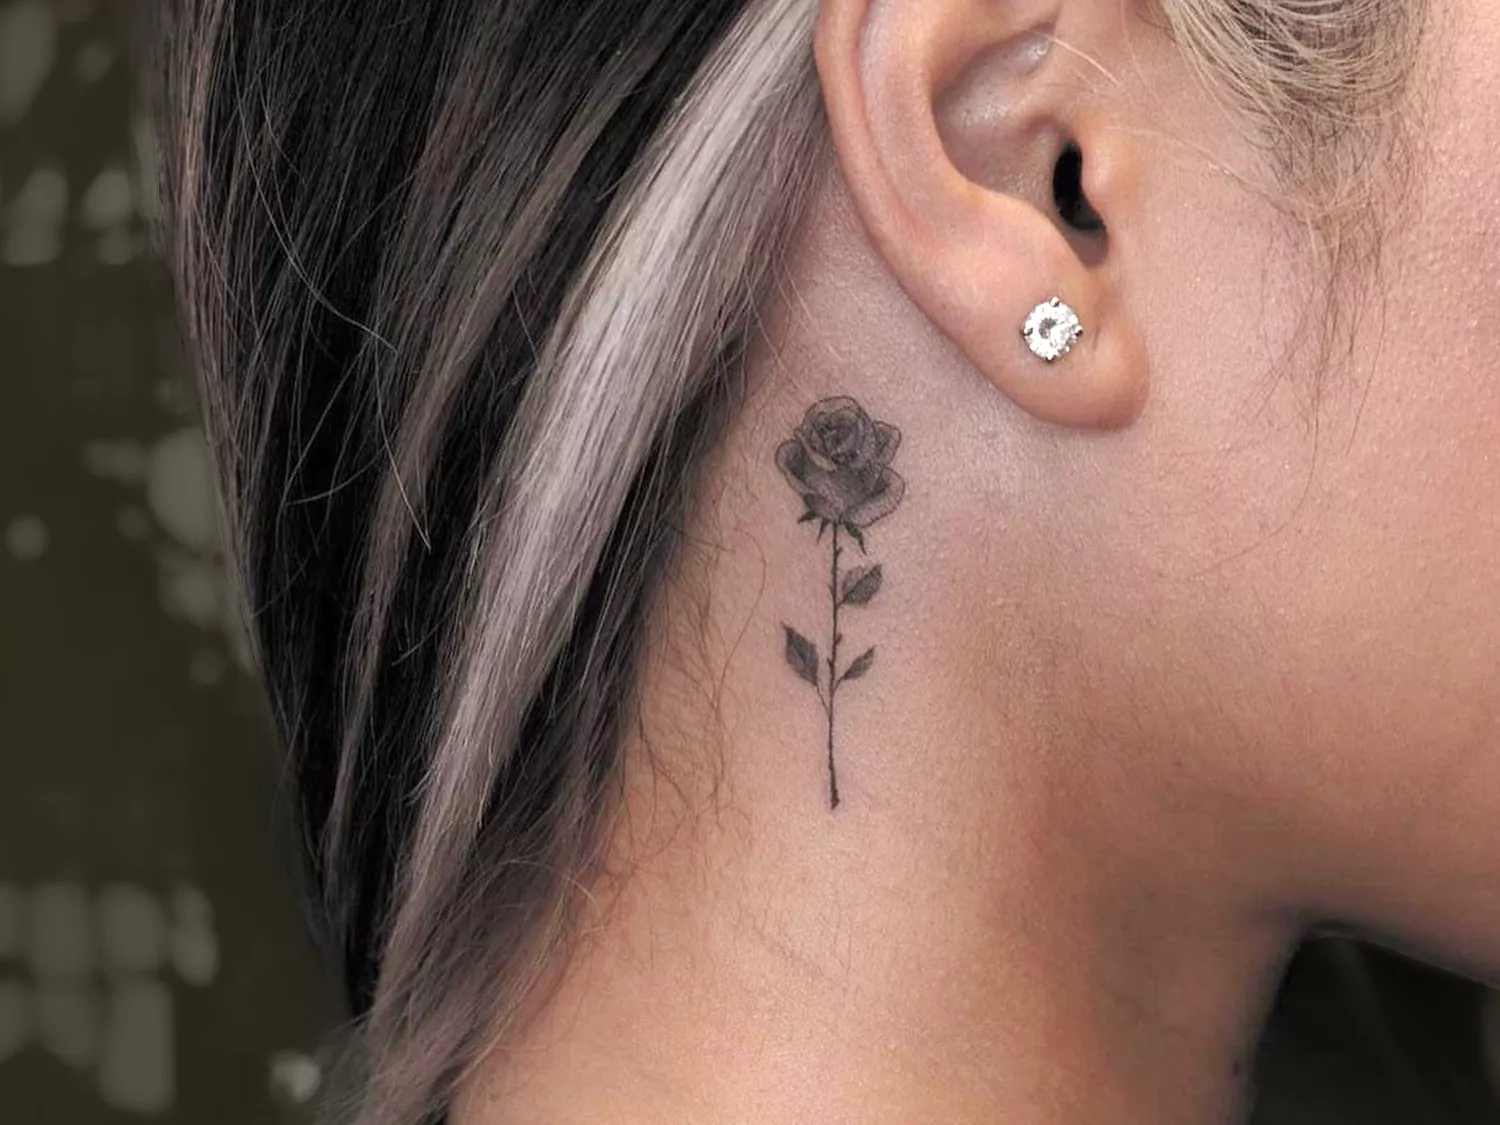 Woman with Rose Tattoo on her Neck Behind Her Ear